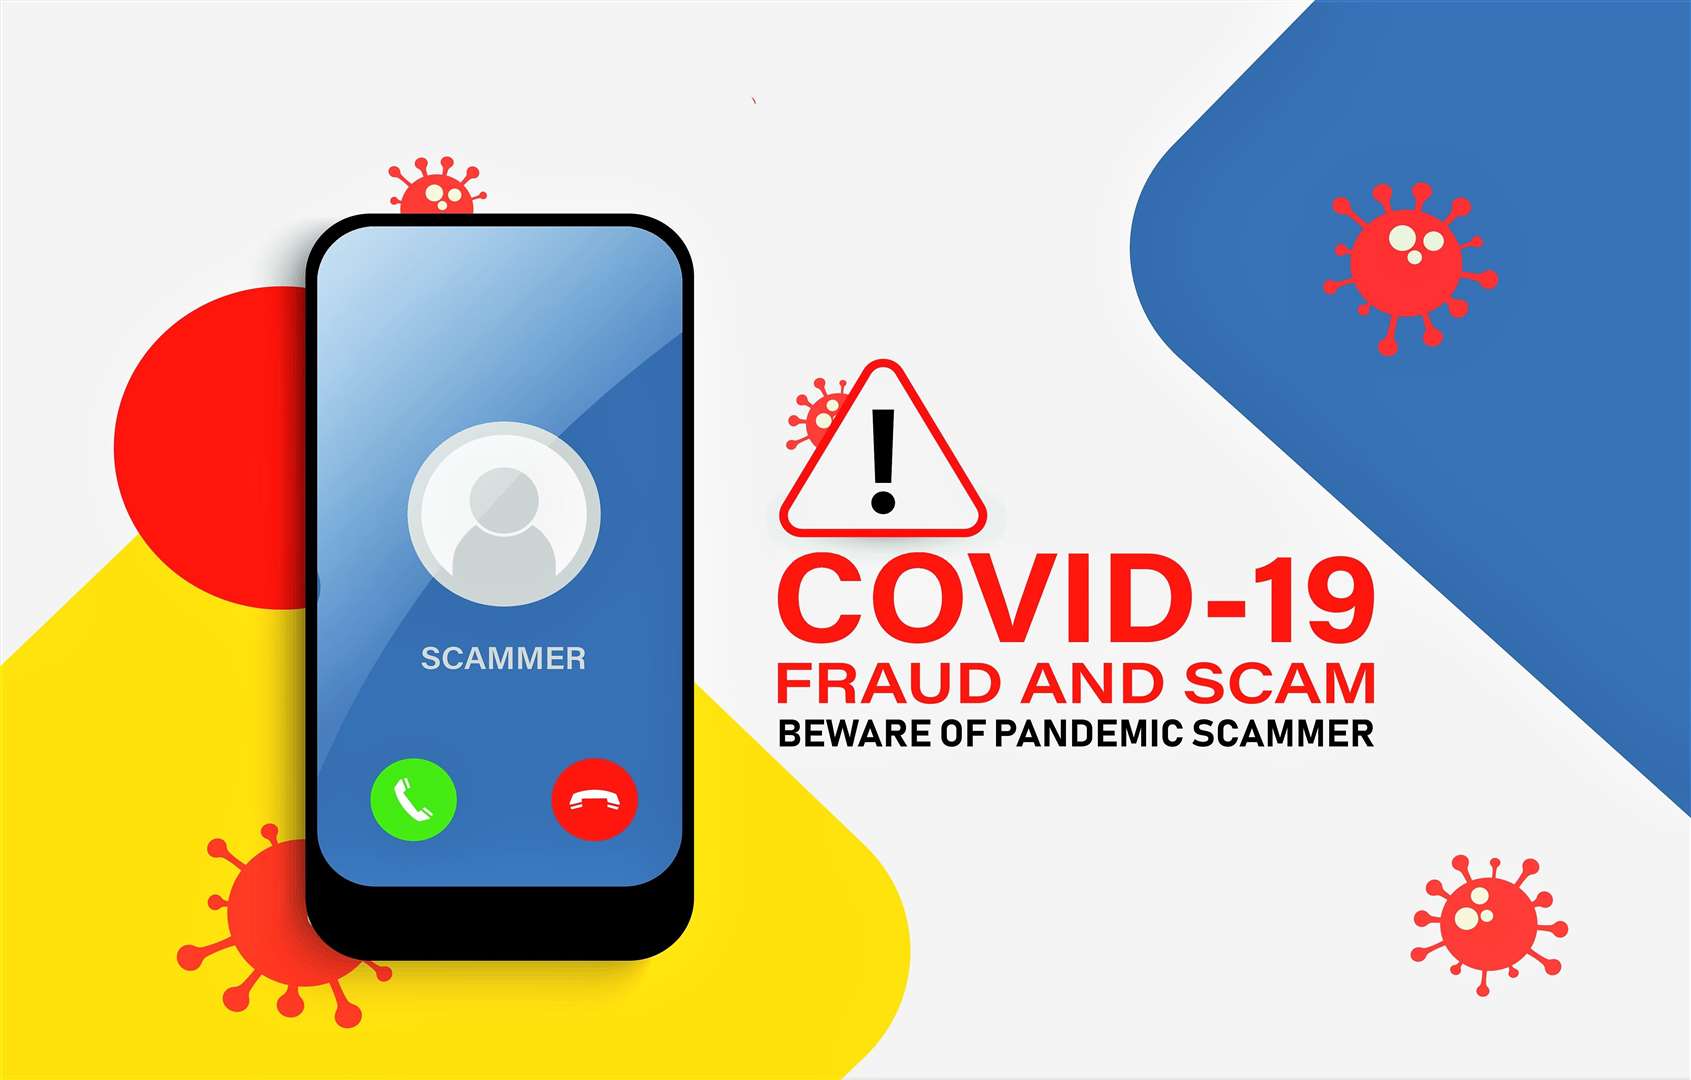 Cyber criminal preying on online users during Covid-19 outbreak.